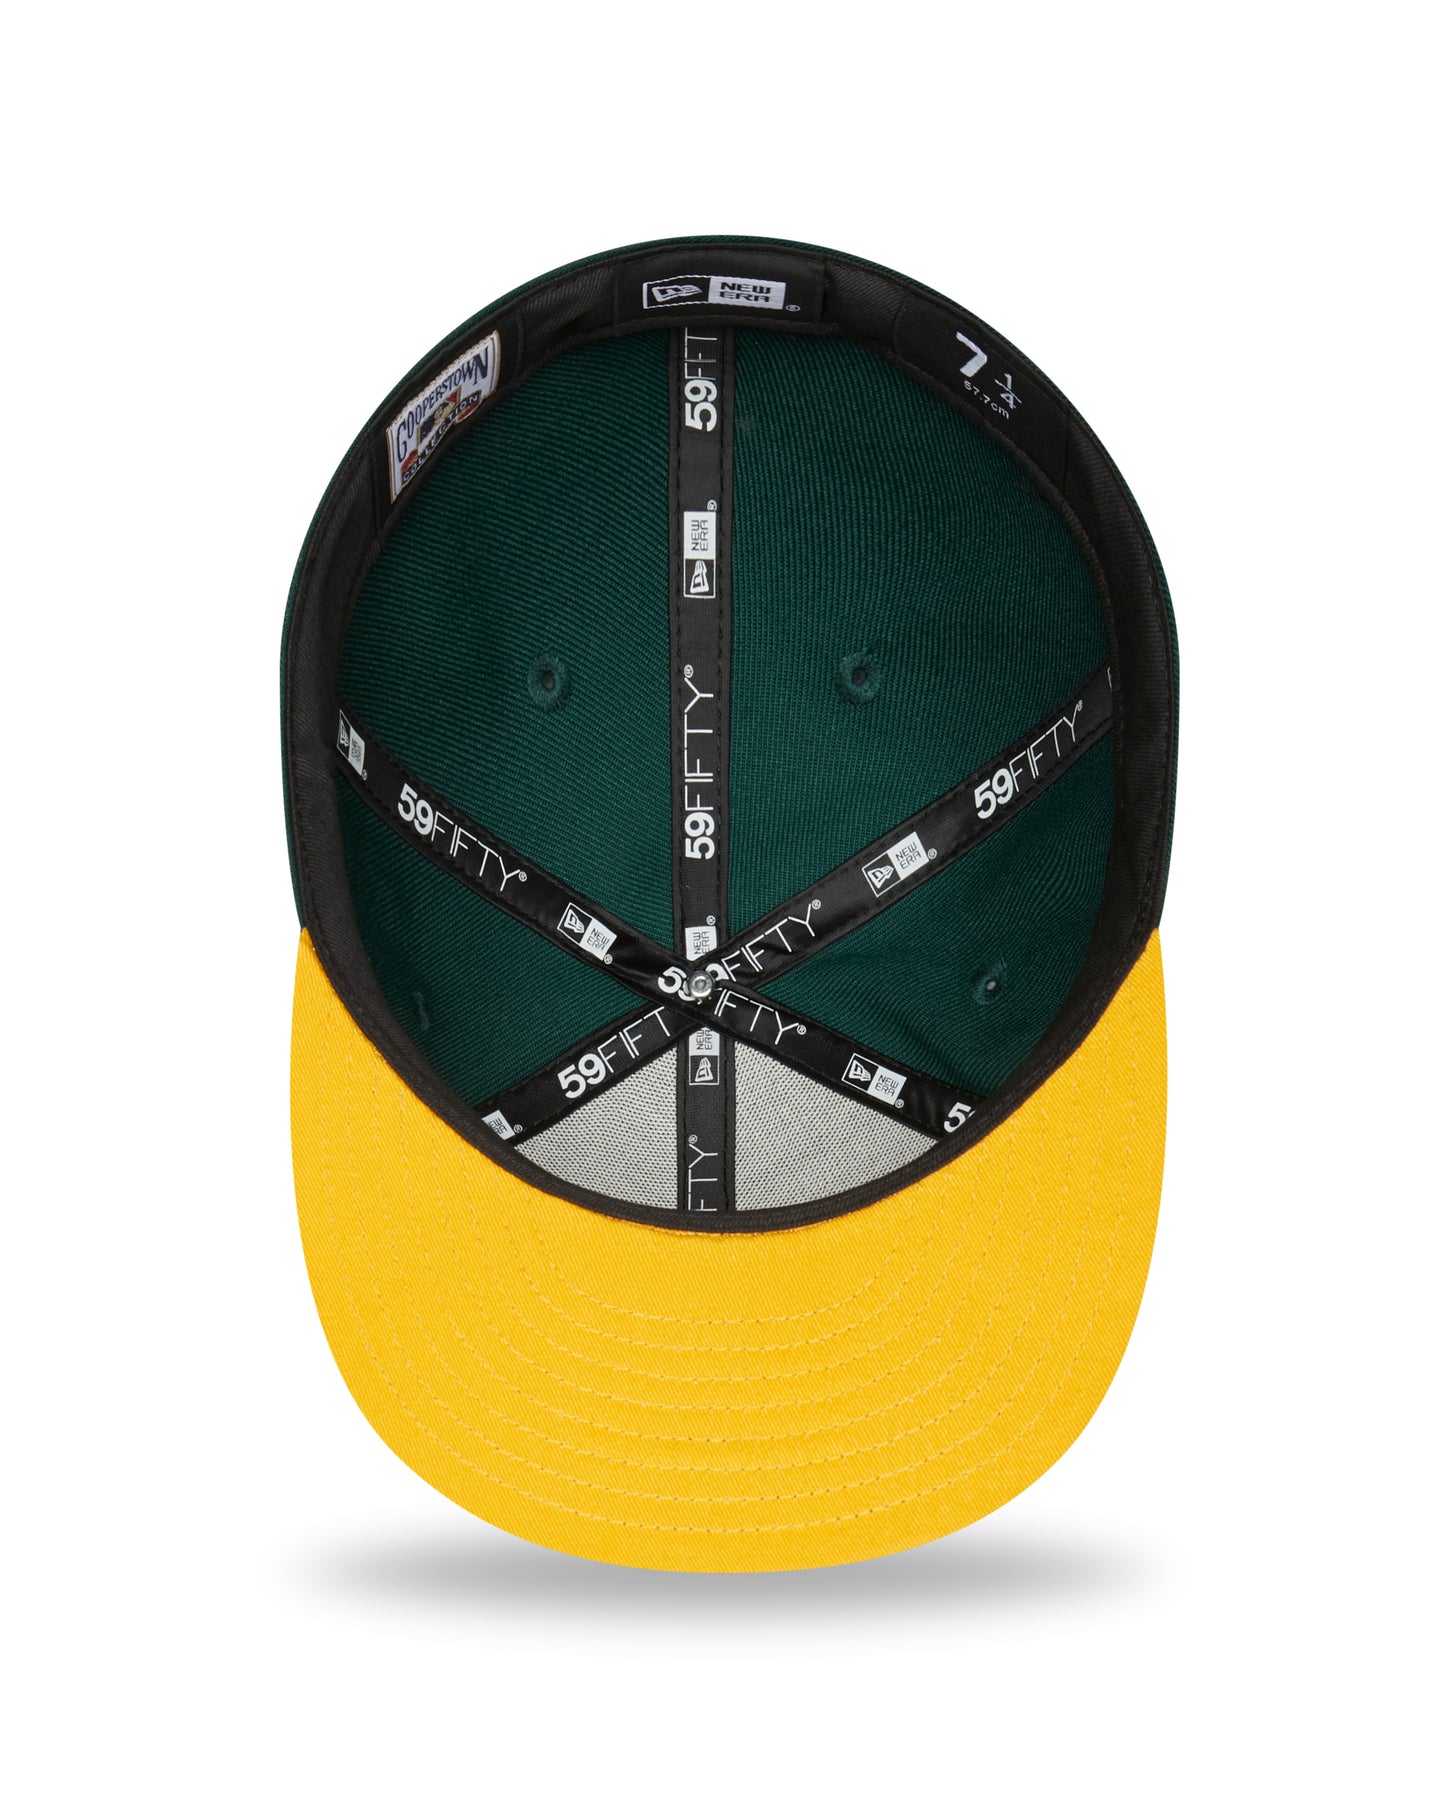 Team Color Split 59fifty Fitted Cap Oakland Athletics - Green - Headz Up 